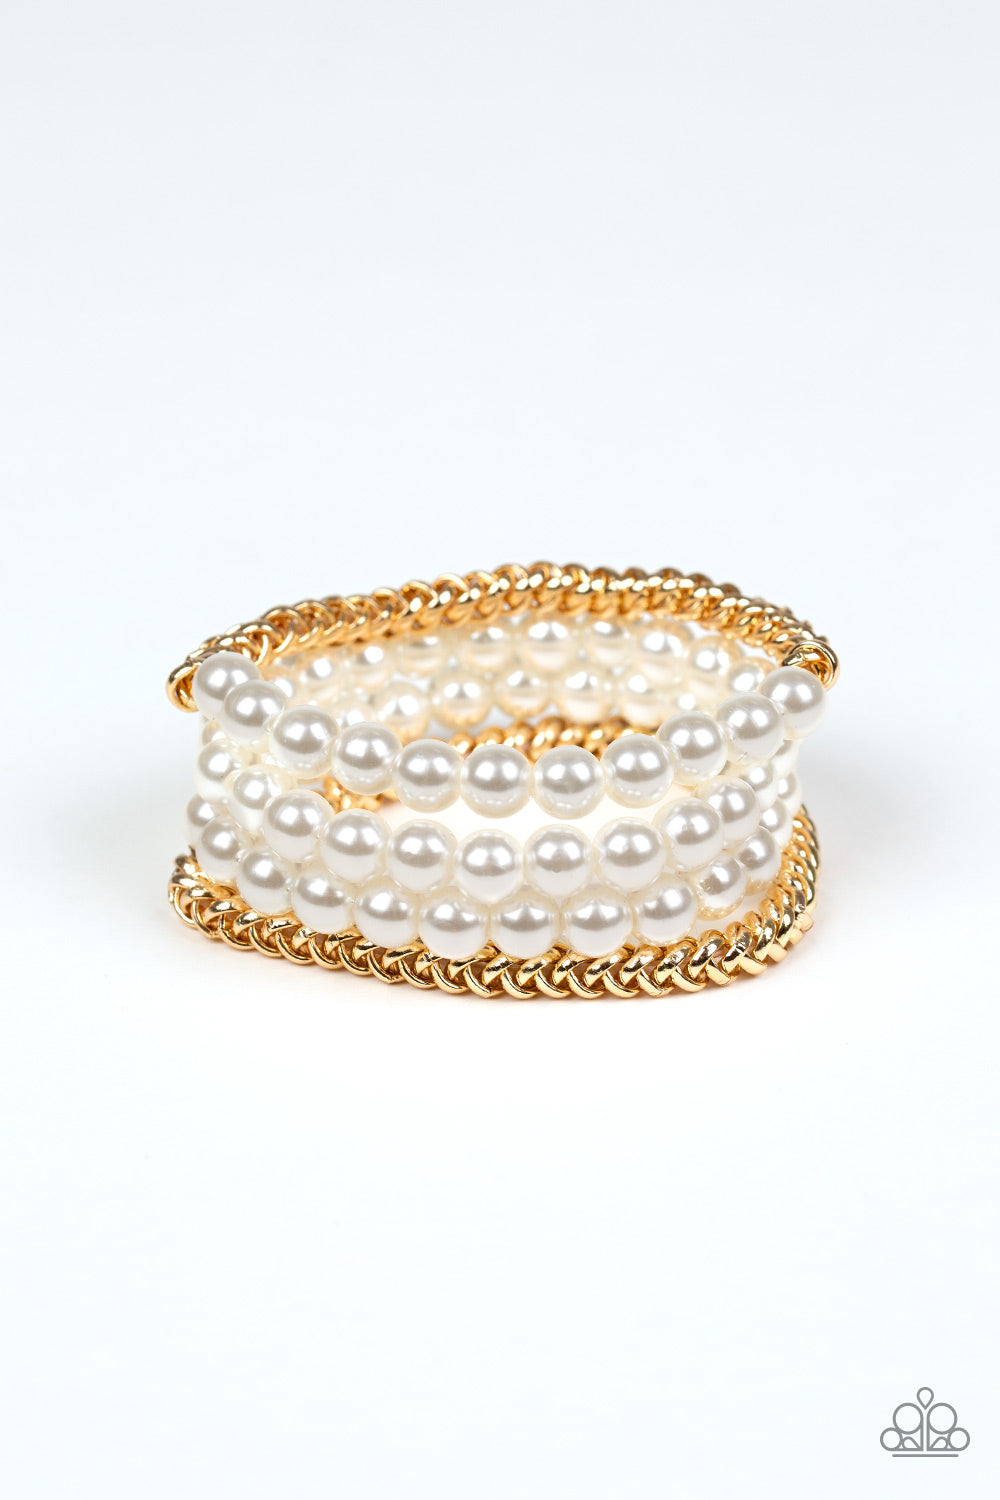 Industrial Incognito - Gold/White Pearl bracelet